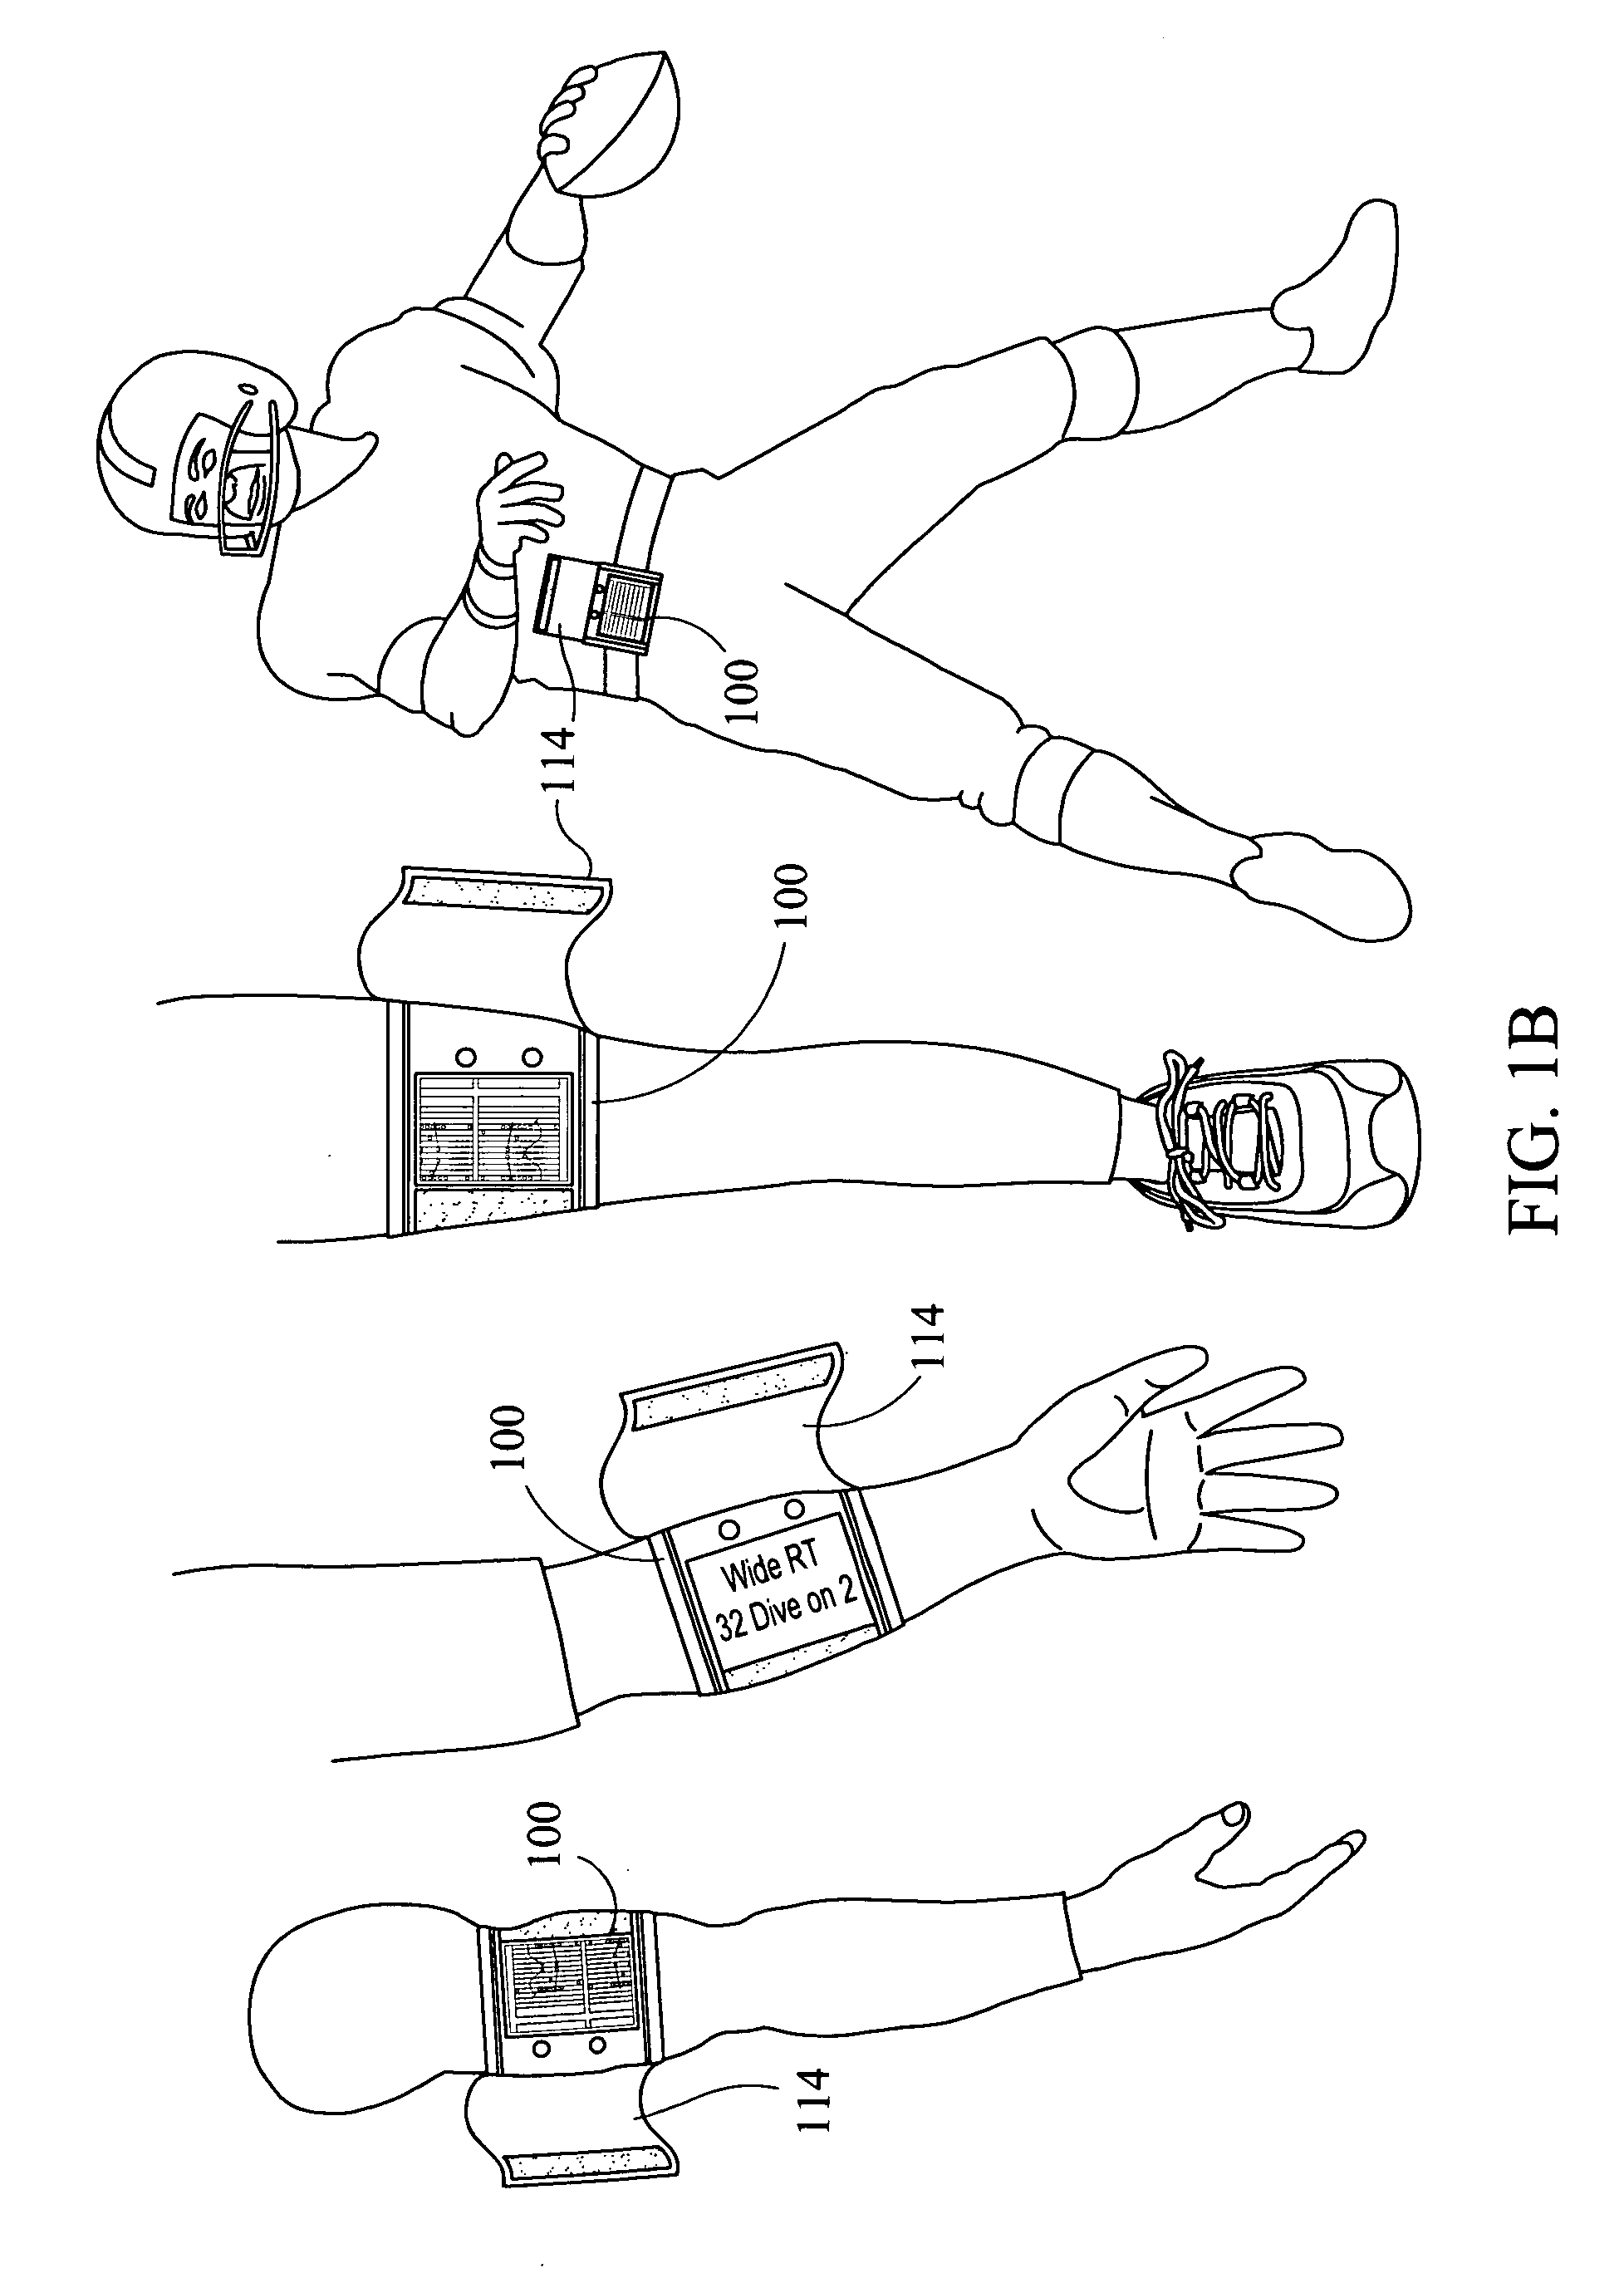 Apparatus and method for improving in-game communications during a game